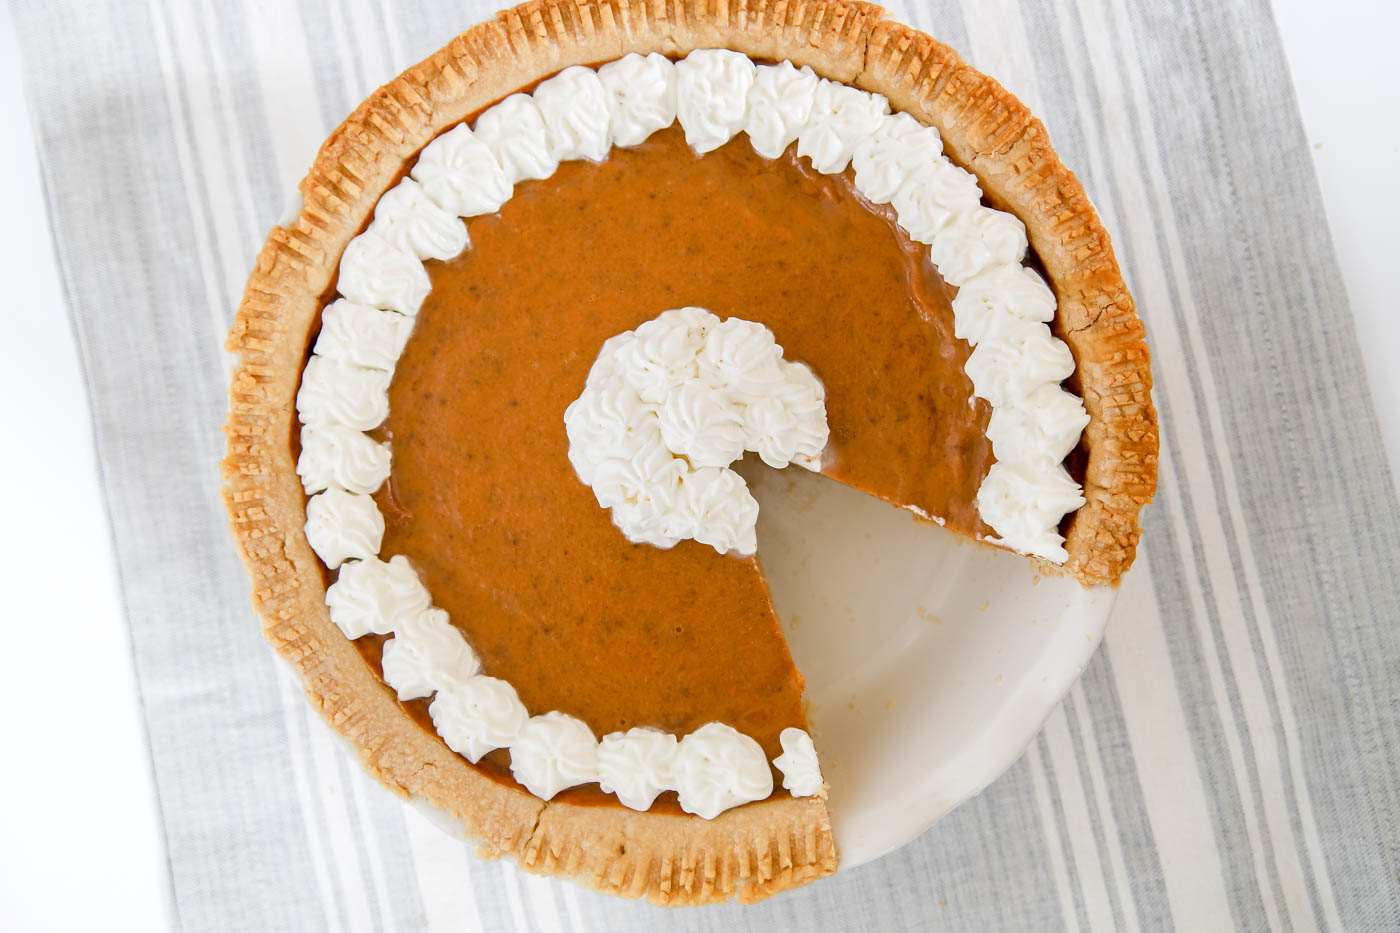 pumpkin pie from scratch with homemade whipped cream